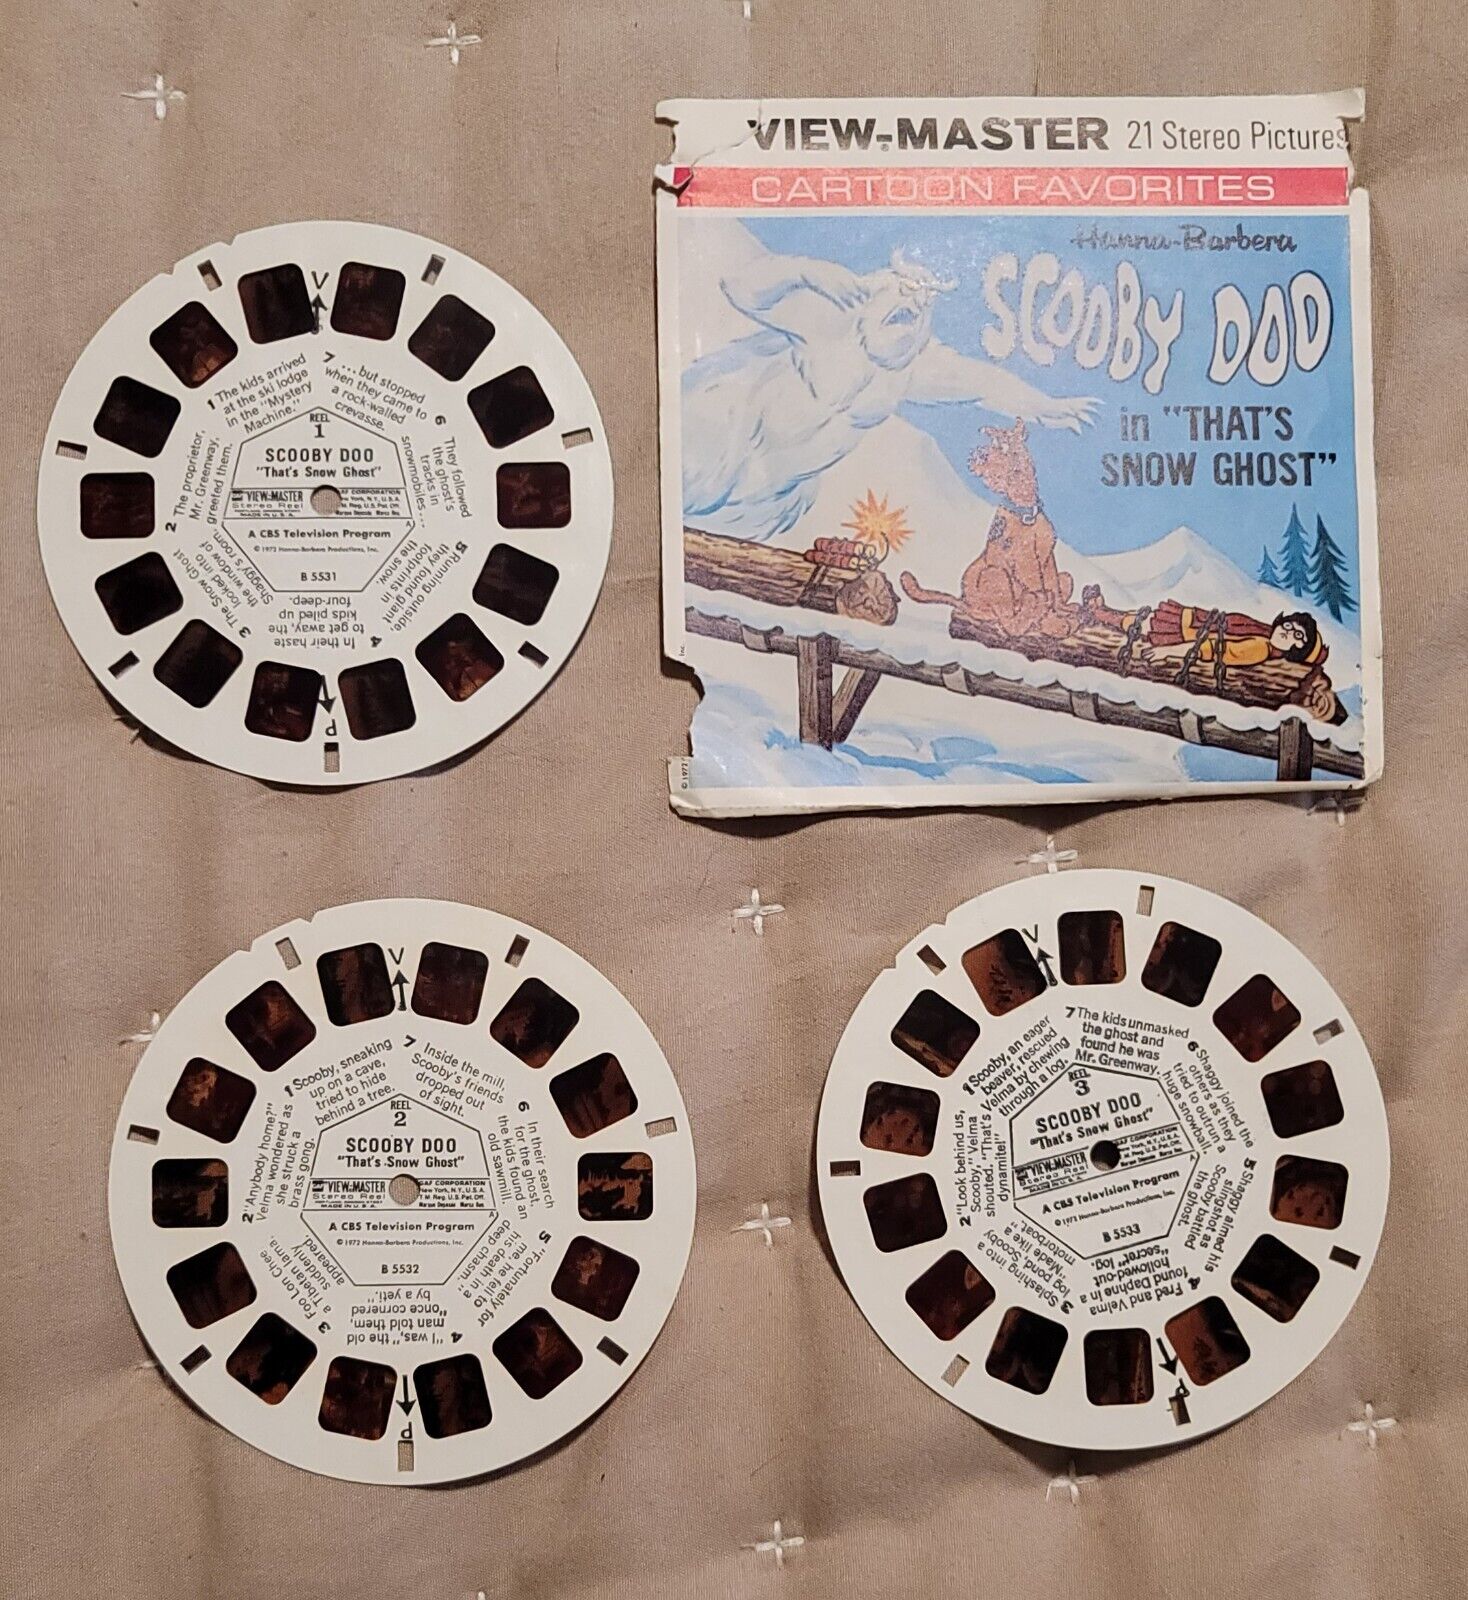 Vintage 1972 View-Master SCOOBY DOO 3 Reels B553 With Cover That’s Snow Ghost